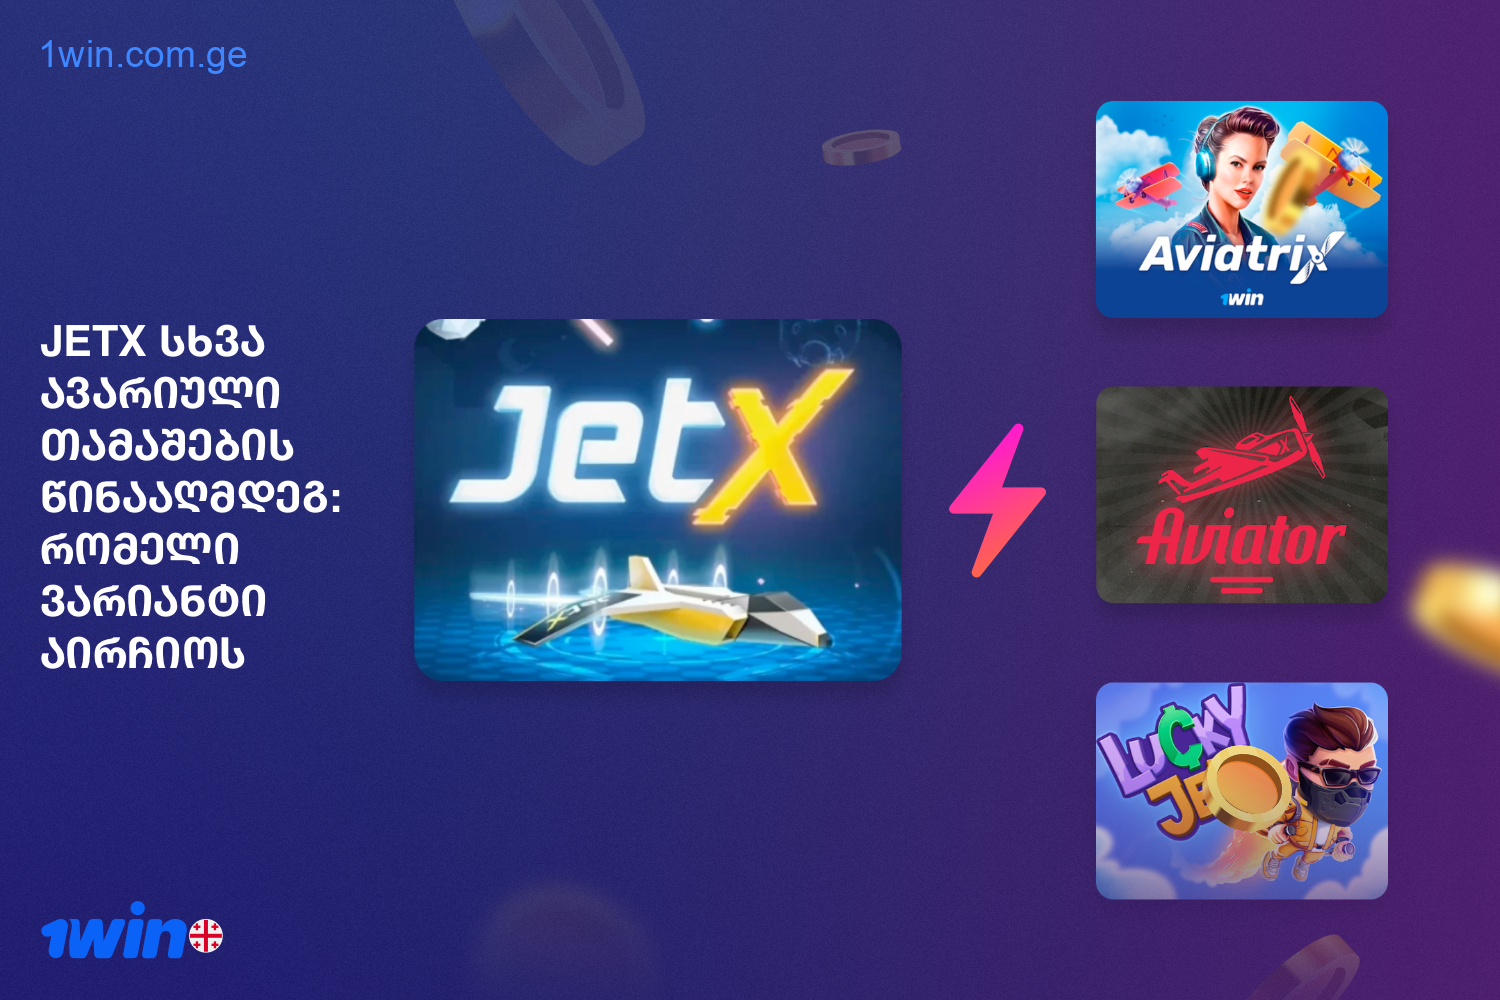 At 1win, users from Georgia have access to other exciting games like JetX